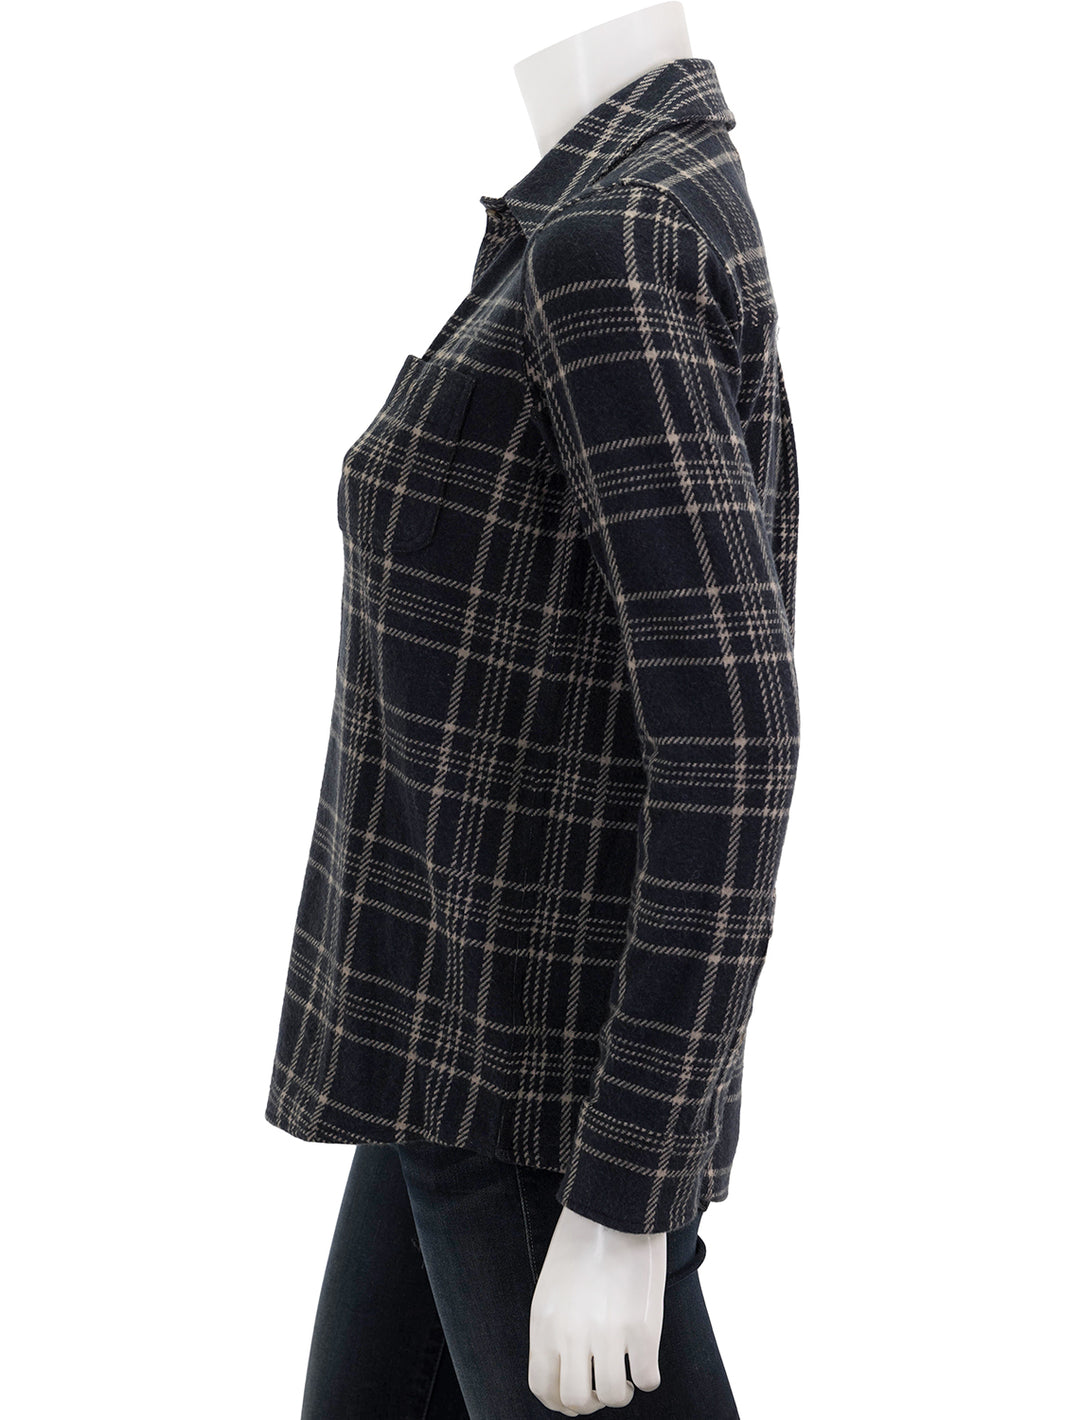 Side view of Faherty's legend sweater shirt in dakota plaid.